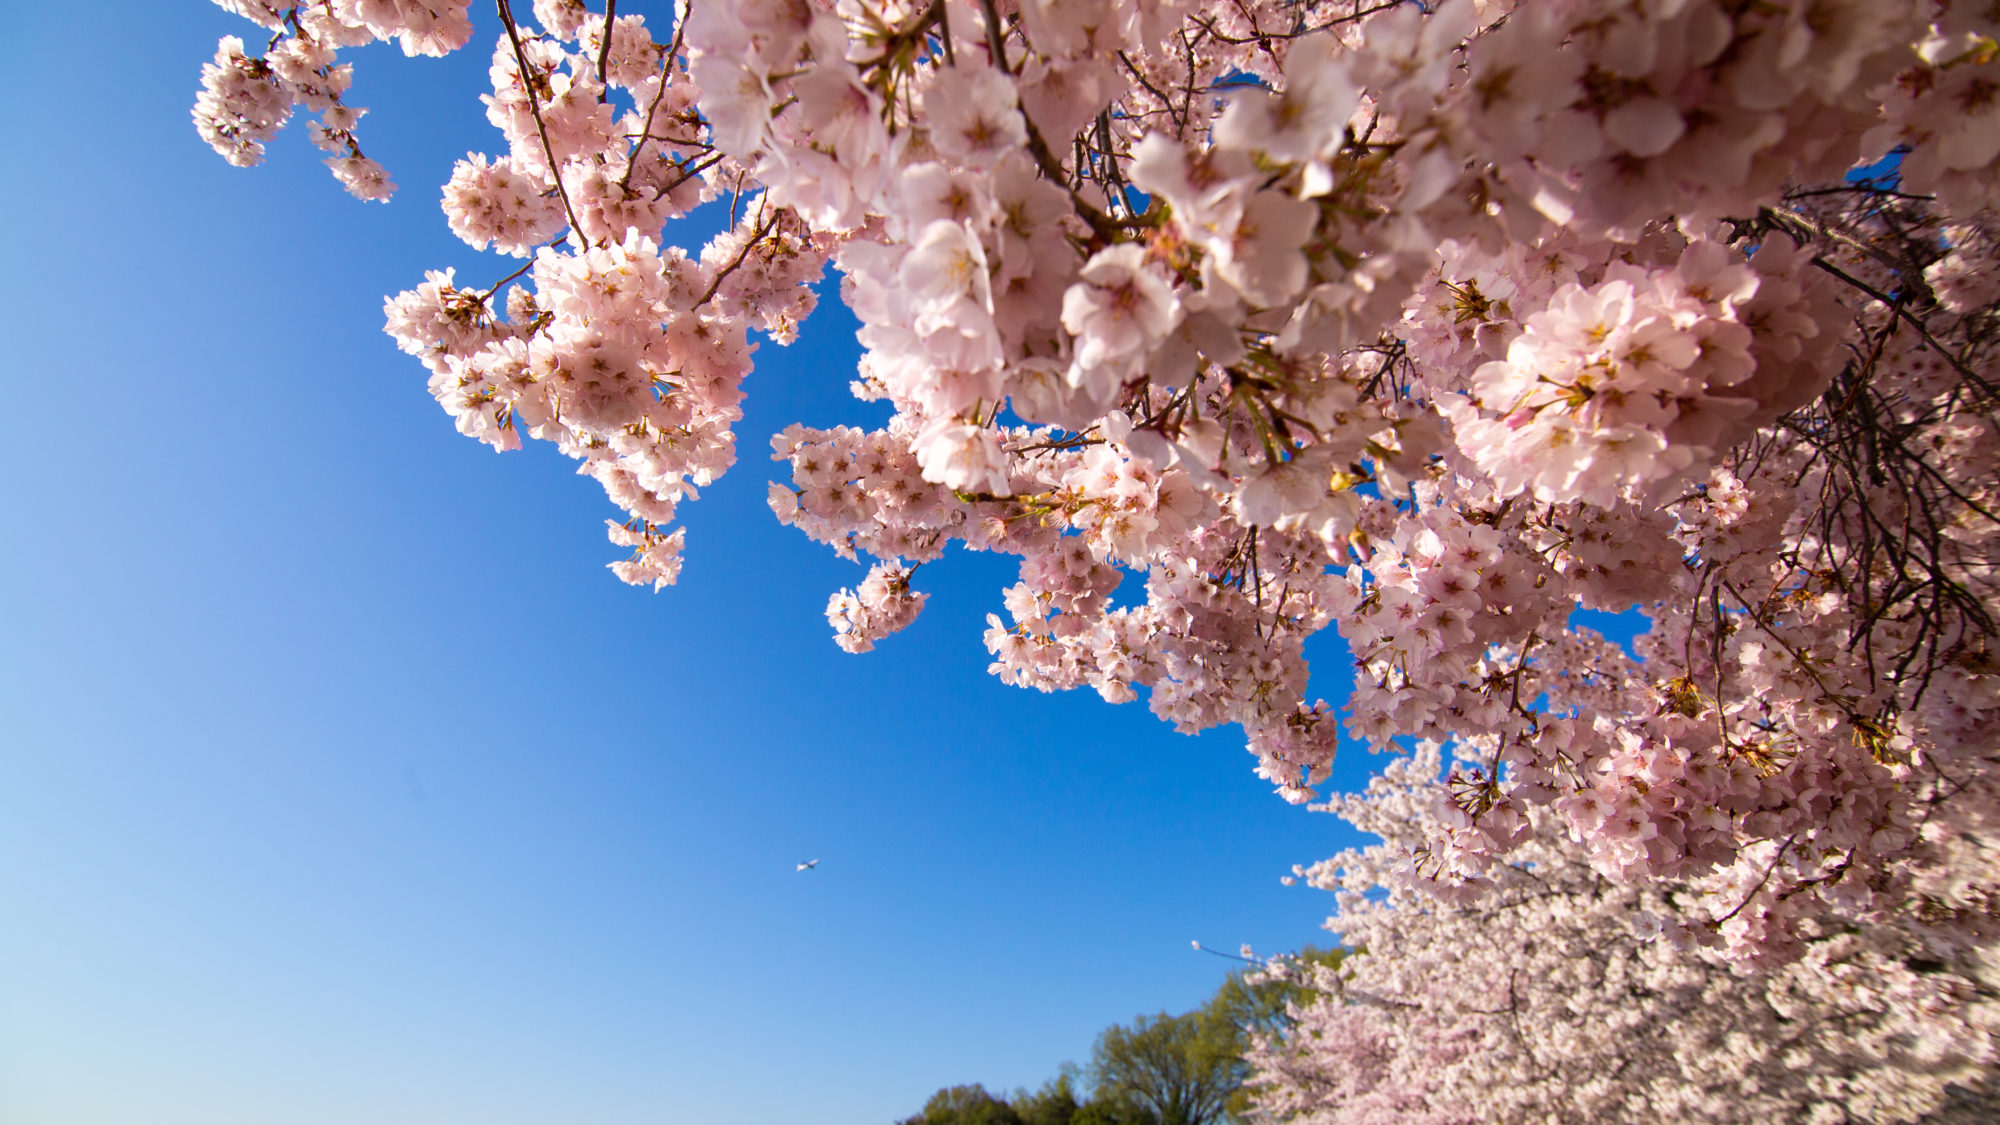 Pink cherry blossoms hang over the tidal basin with a blue sky behind them.